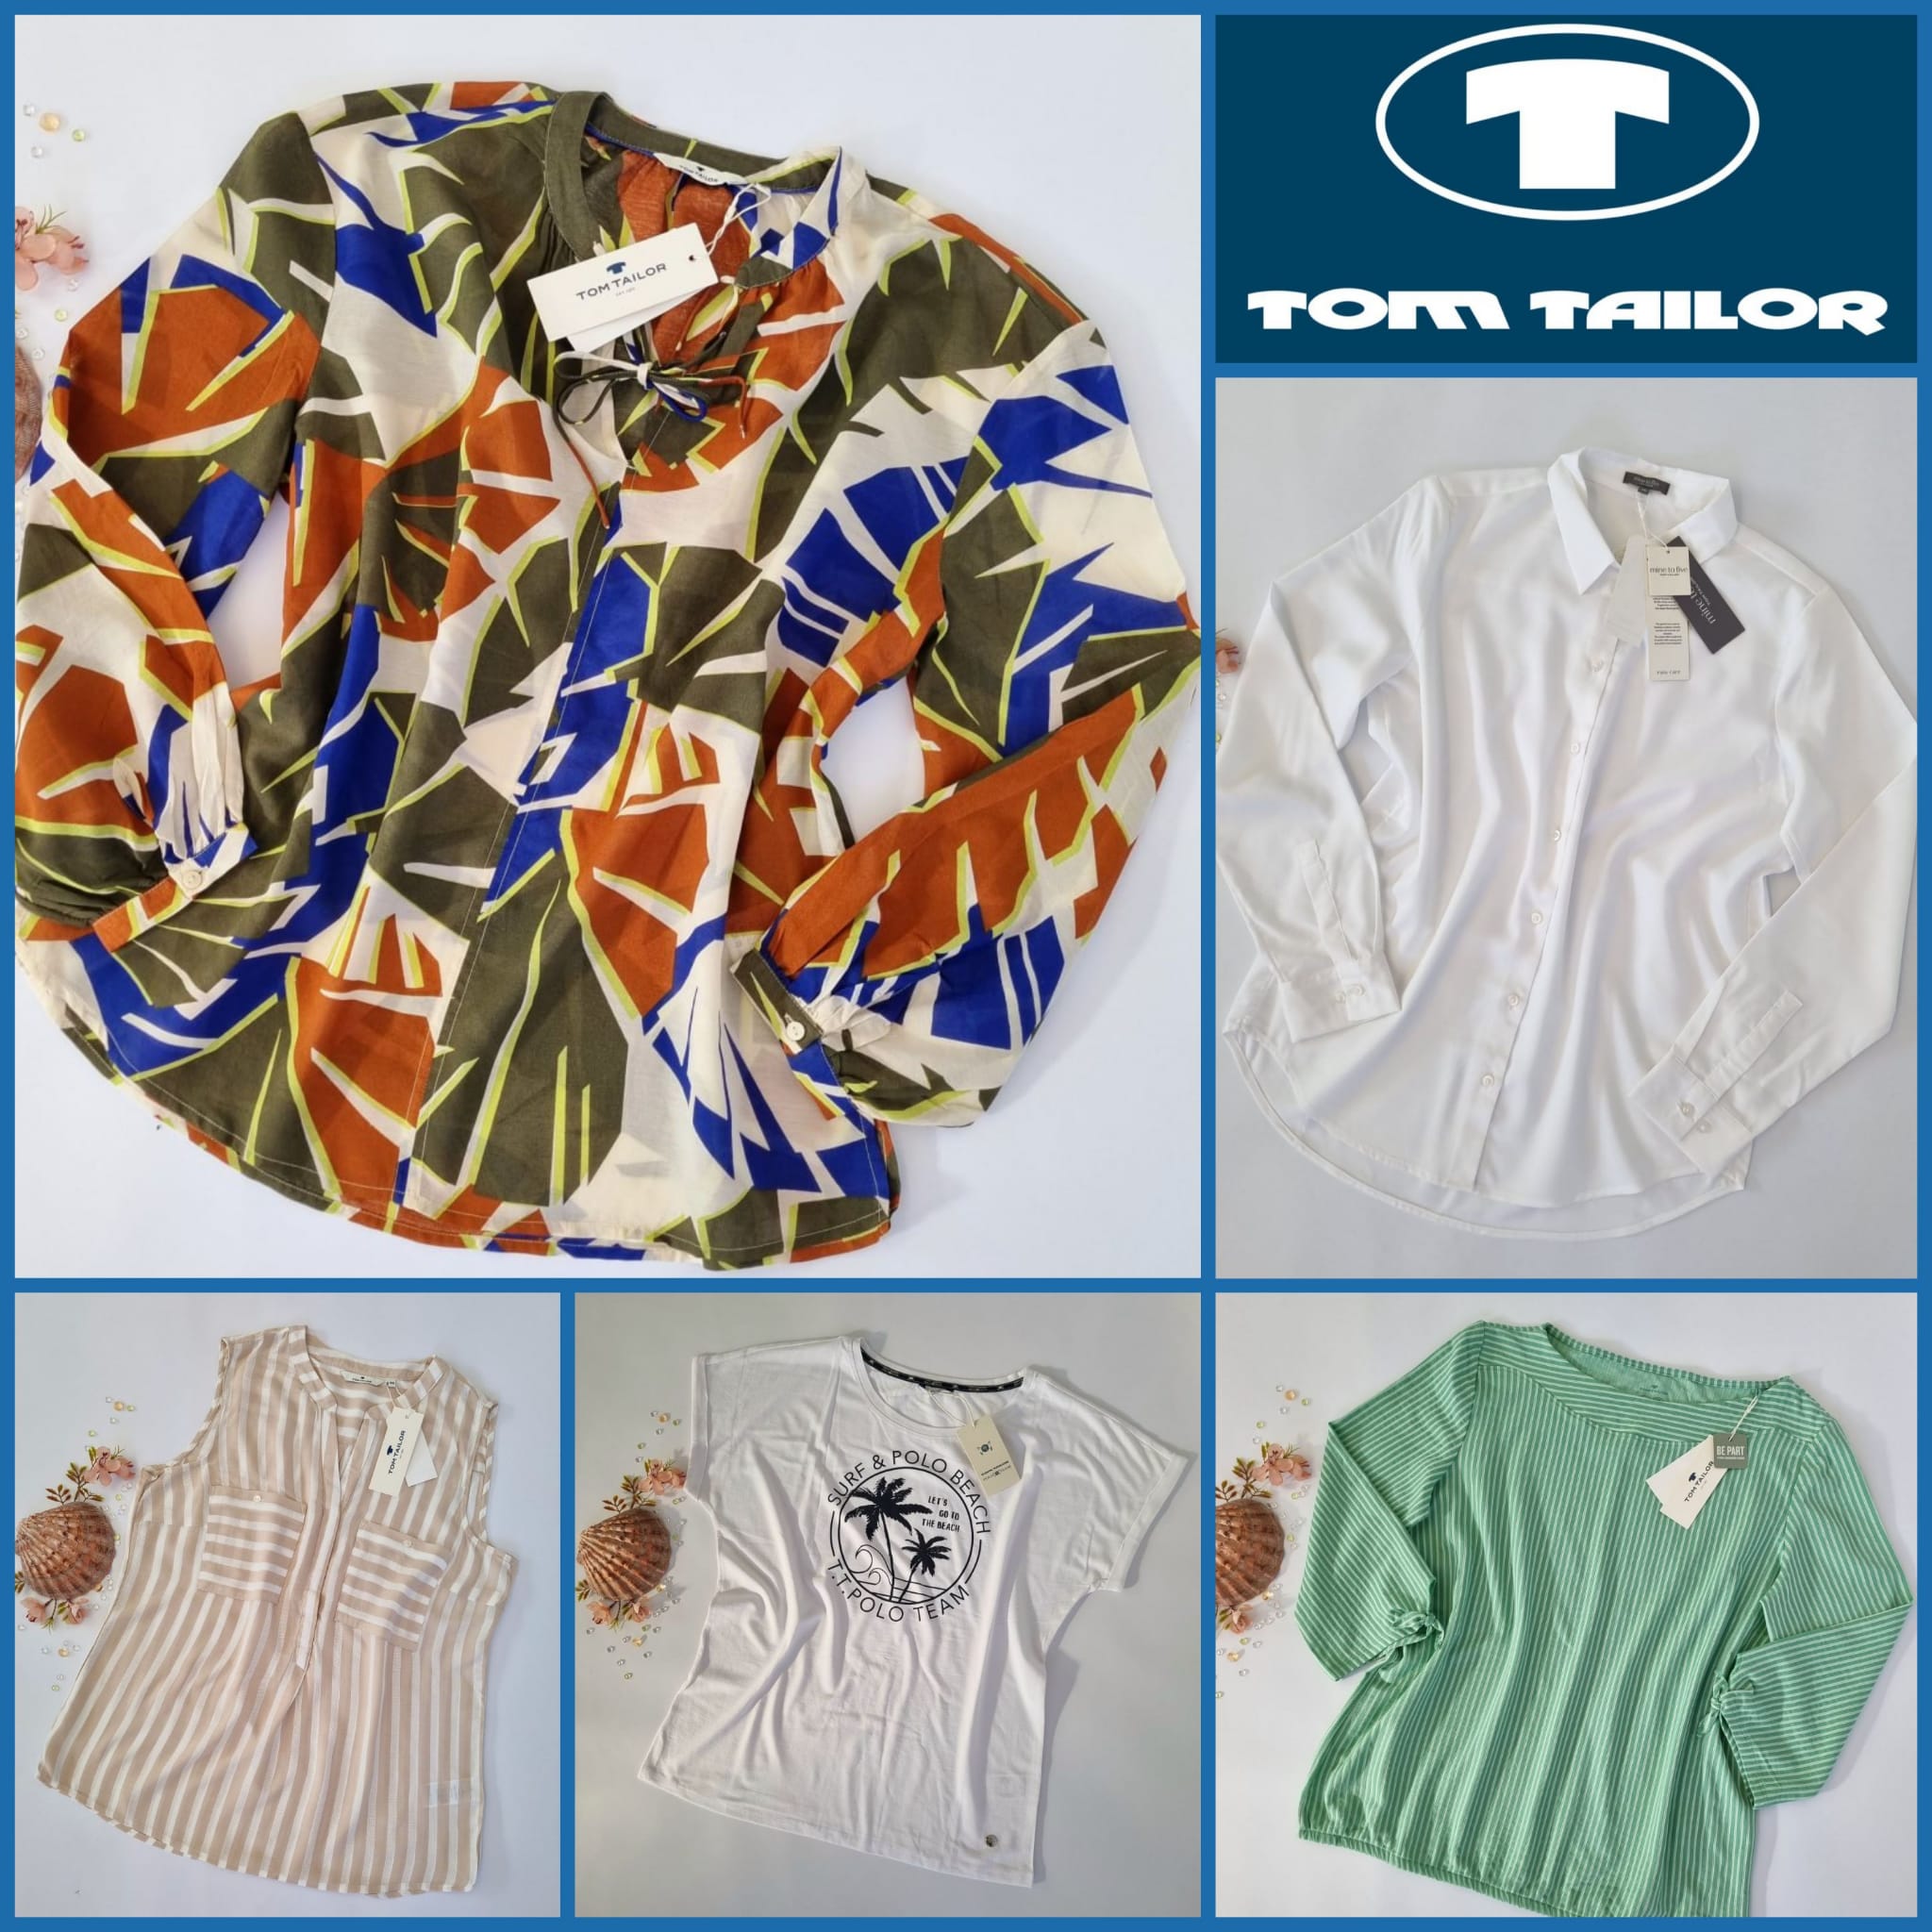 A mix of women's blouses and T-shirts from Tom Tailor